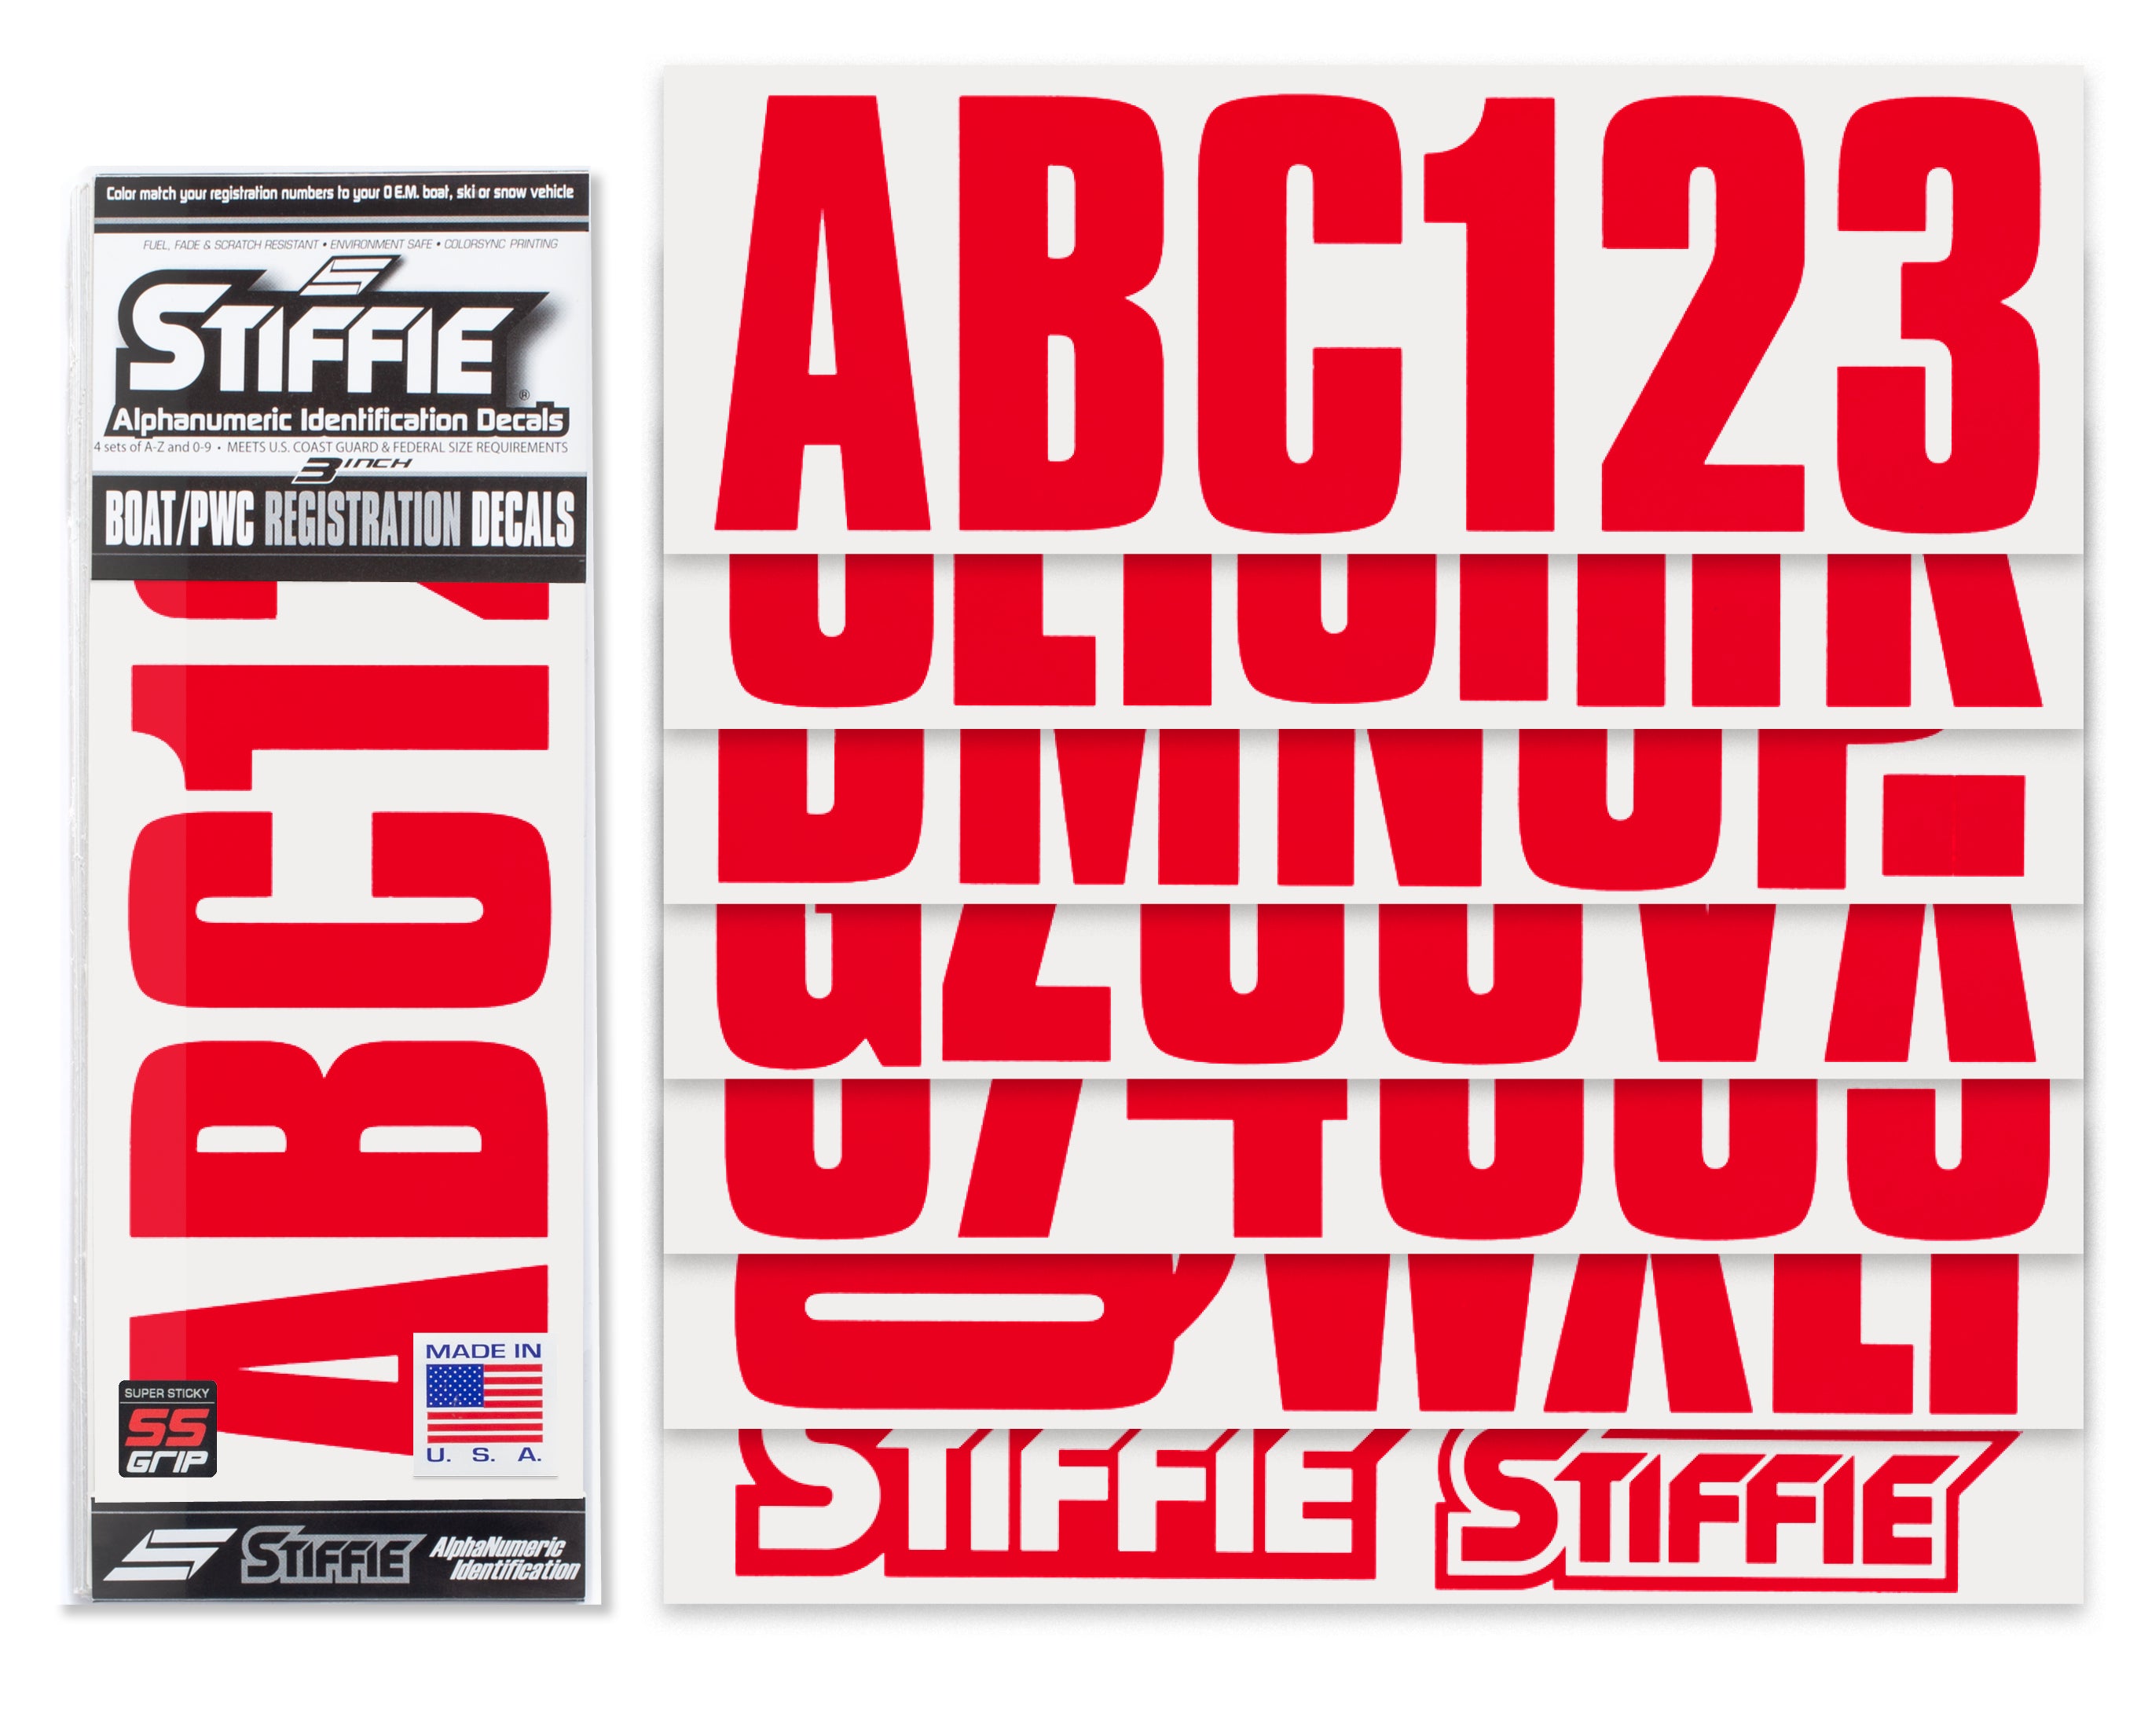 STIFFIE Uniline Lava Red Super Sticky 3" Alpha Numeric Registration Identification Numbers Stickers Decals for Sea-Doo Spark, Inflatable Boats, Ribs, Hypalon/PVC, PWC and Boats